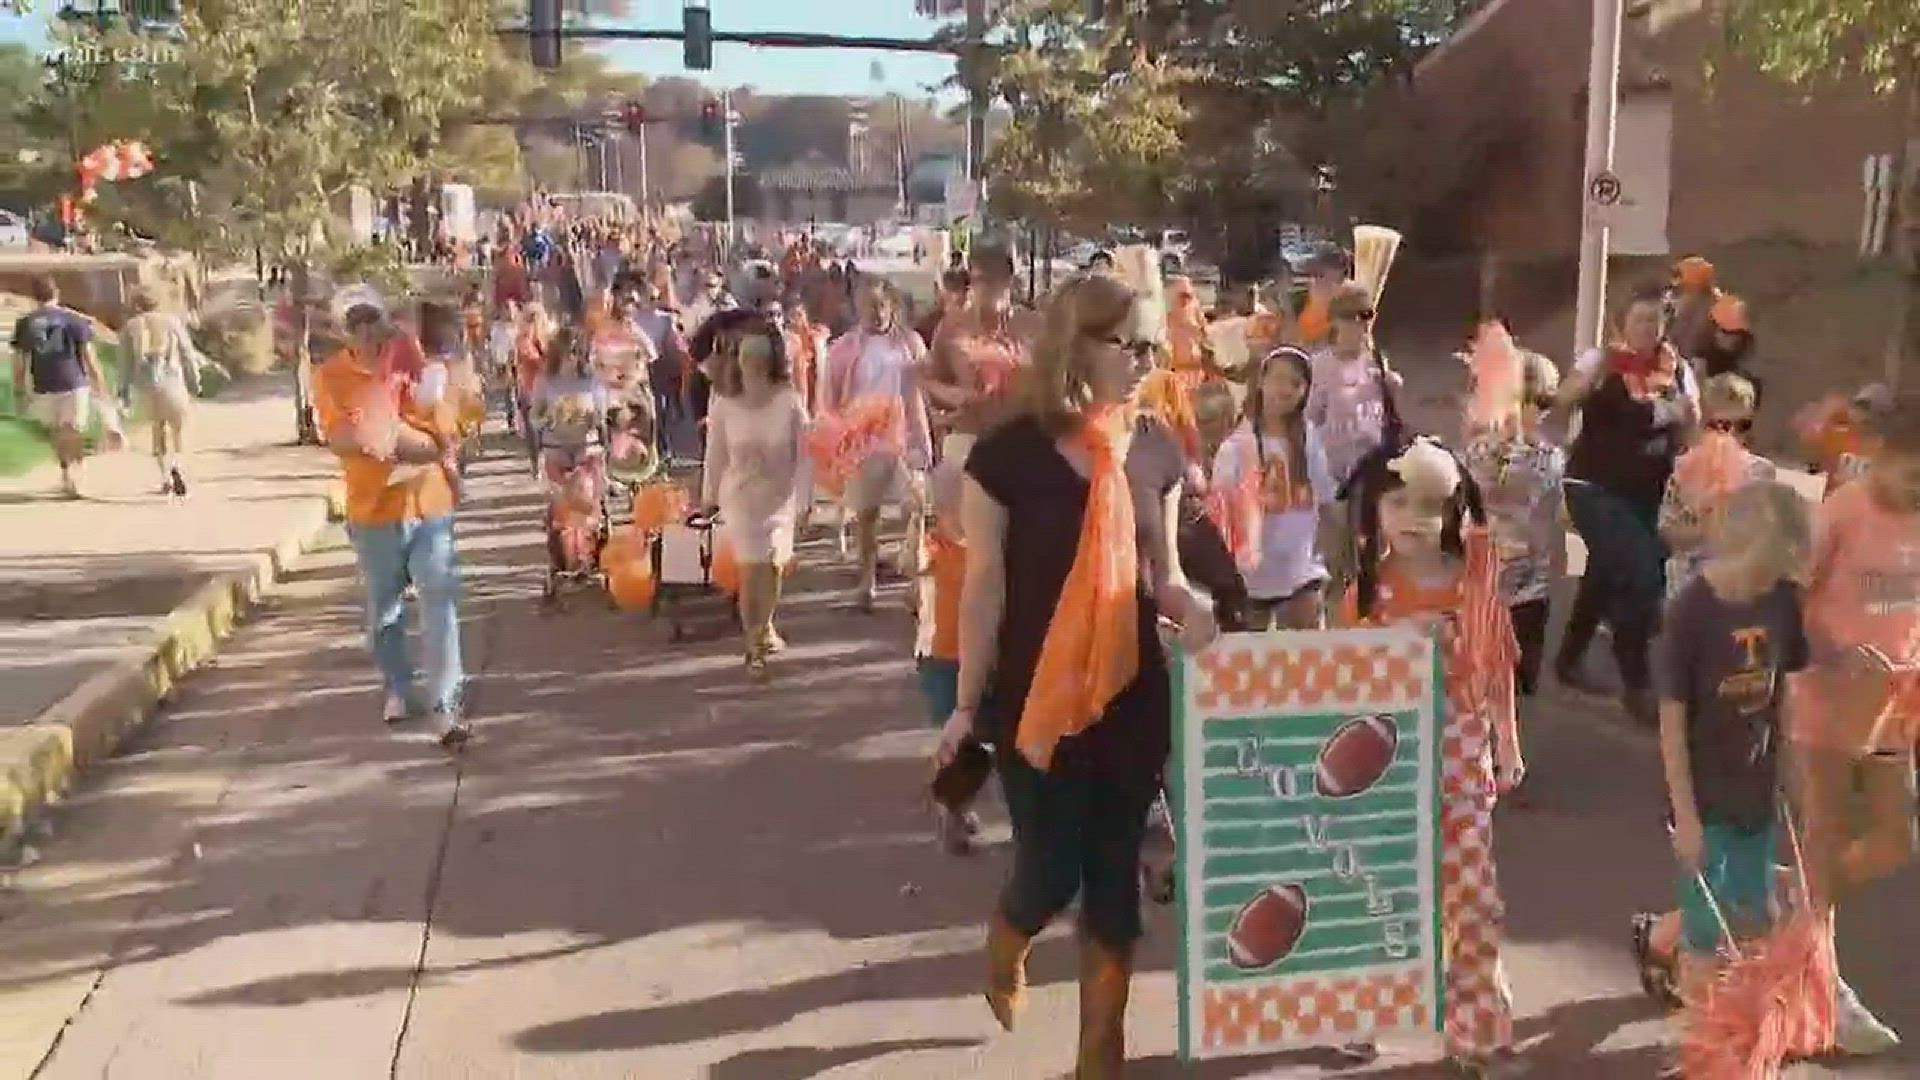 UT's homecoming parade will return to "The Strip" for the first time since the 1980s.